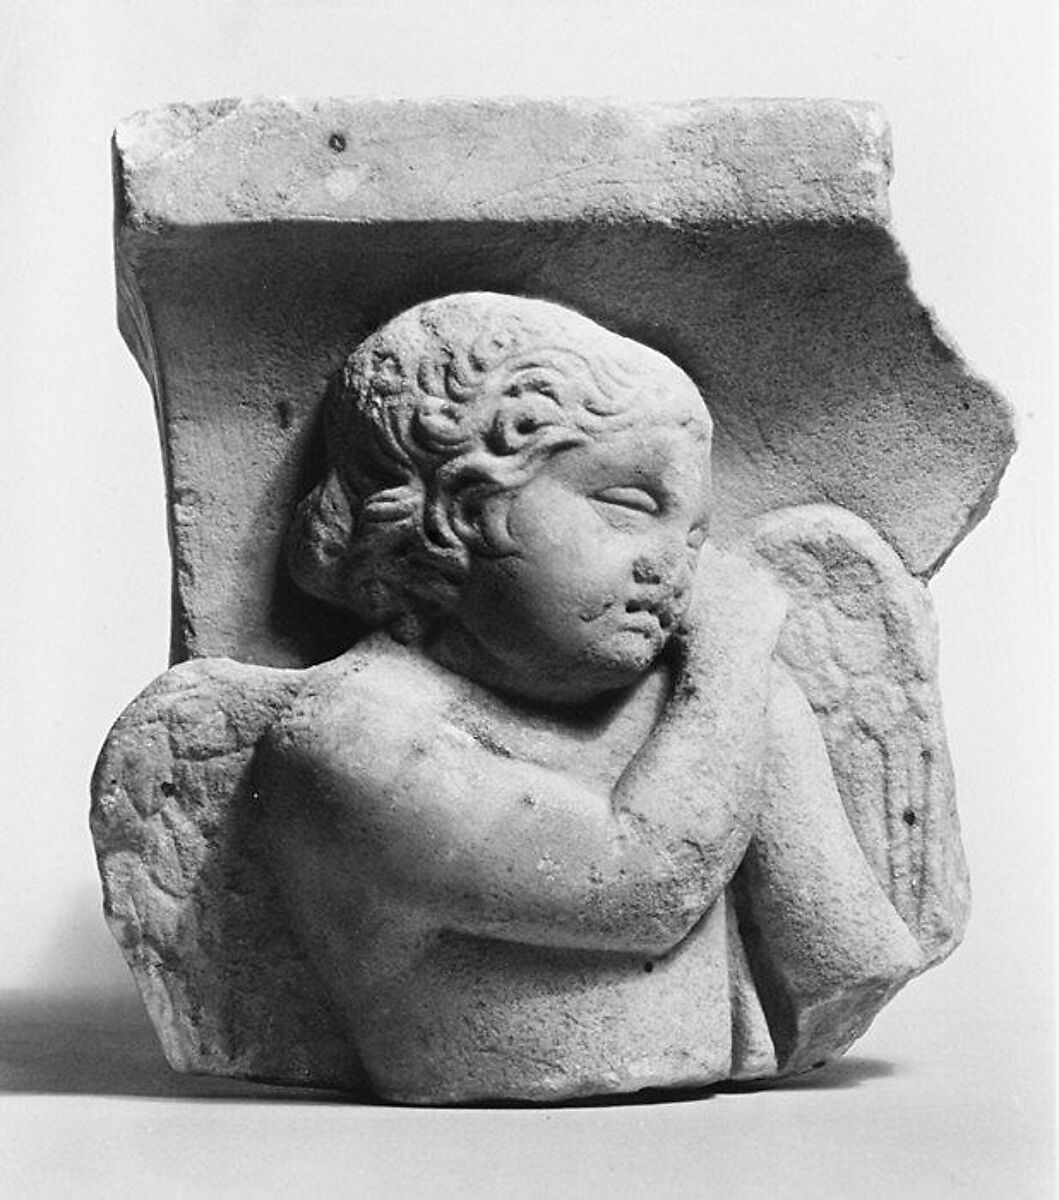 Marble sarcophagus fragment: Eros leaning on a reversed torch, Marble-Luni, Roman